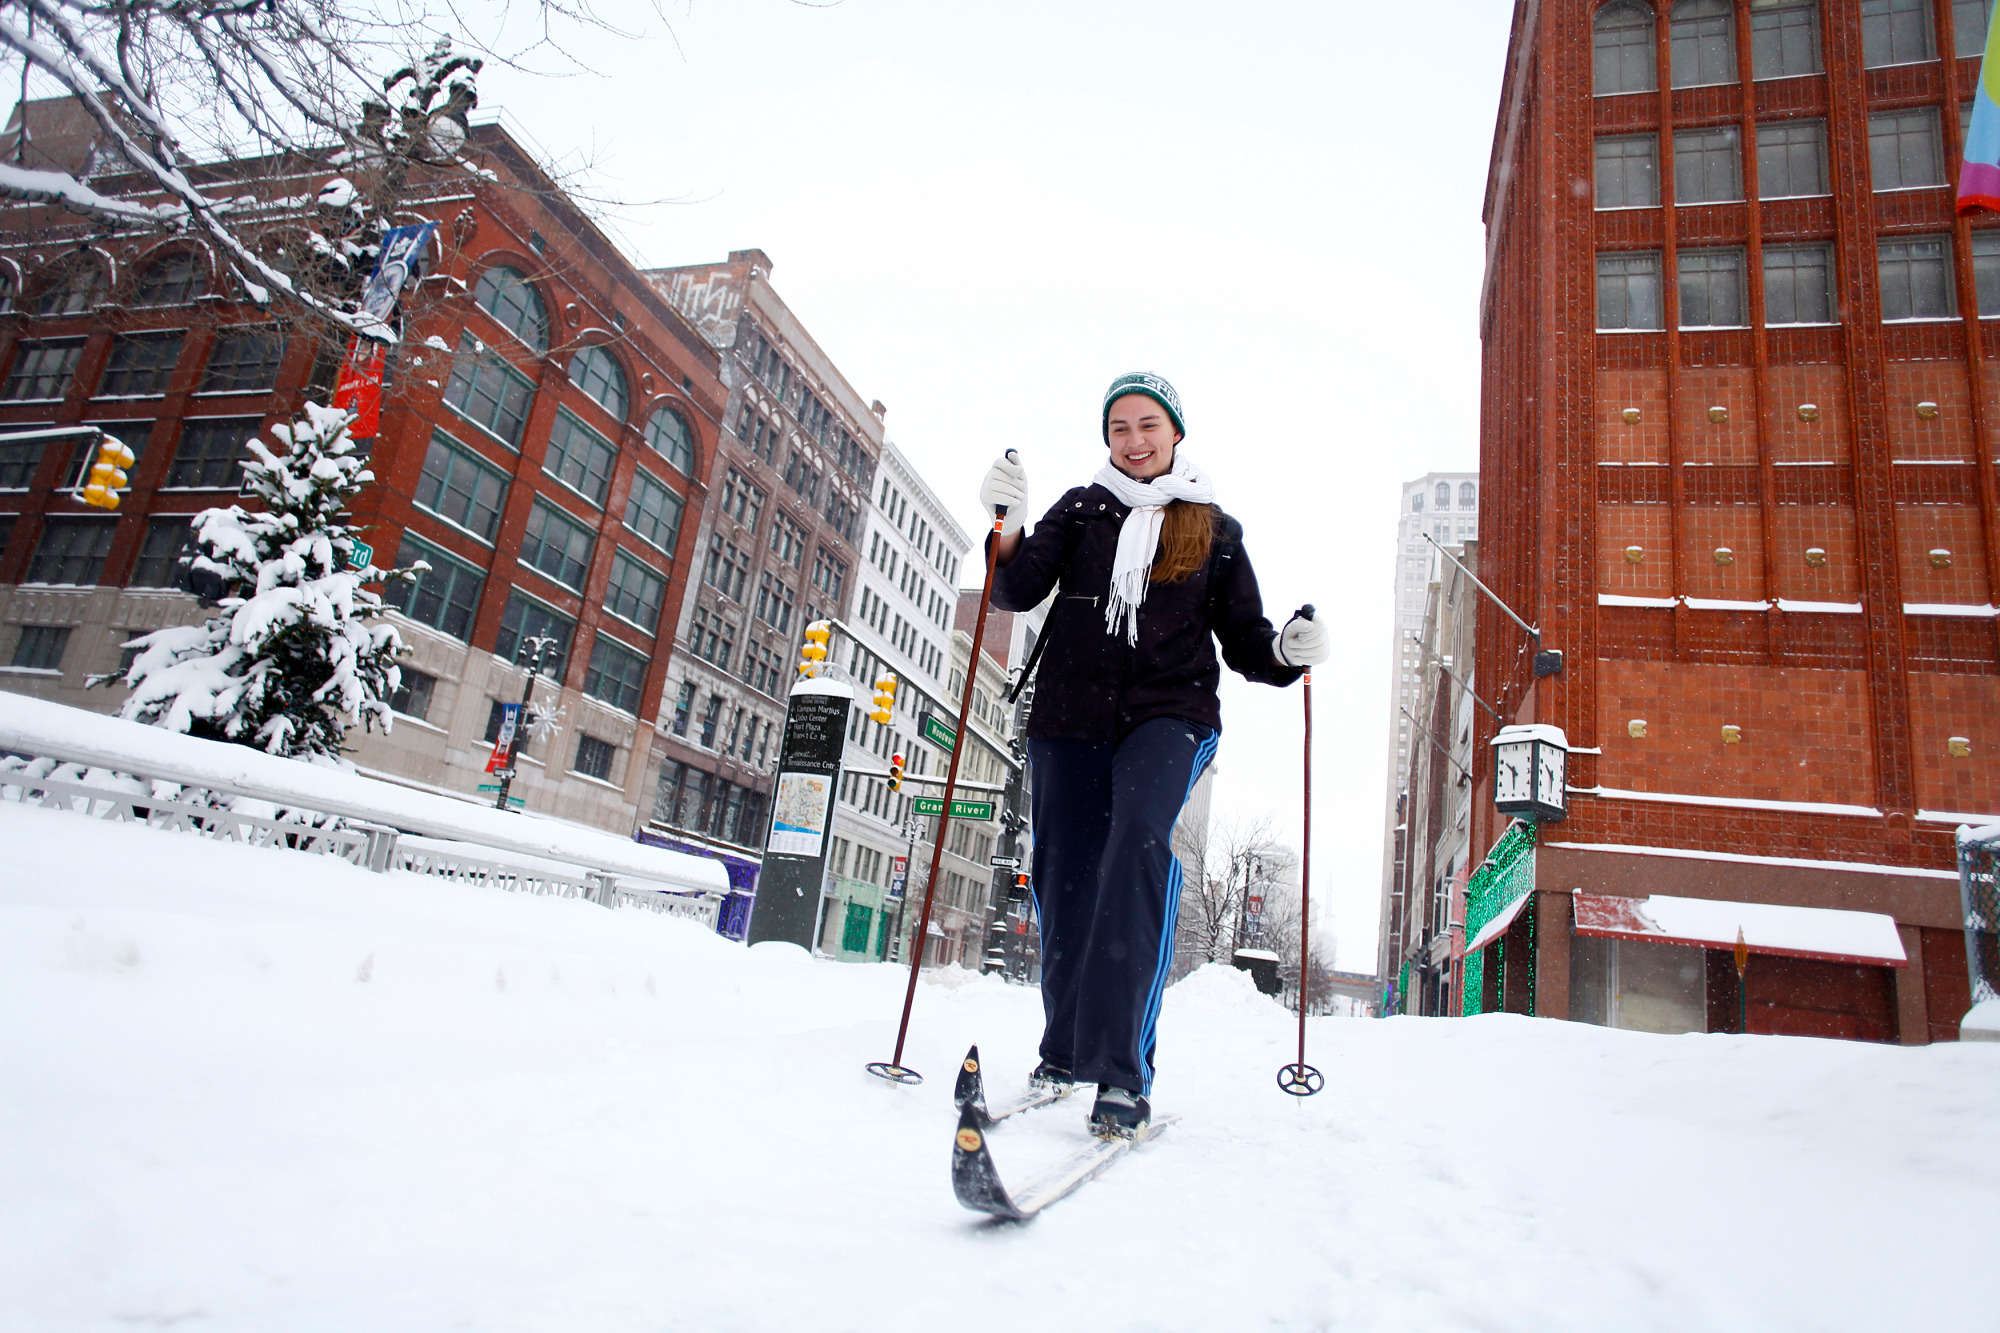 Alison Mueller skies to work through several inches of snow along Woodward Avenue as the area deals with record breaking freezing weather January 6, 2014 in Detroit, Michigan (Joshua Lott&mdash;Getty Images)